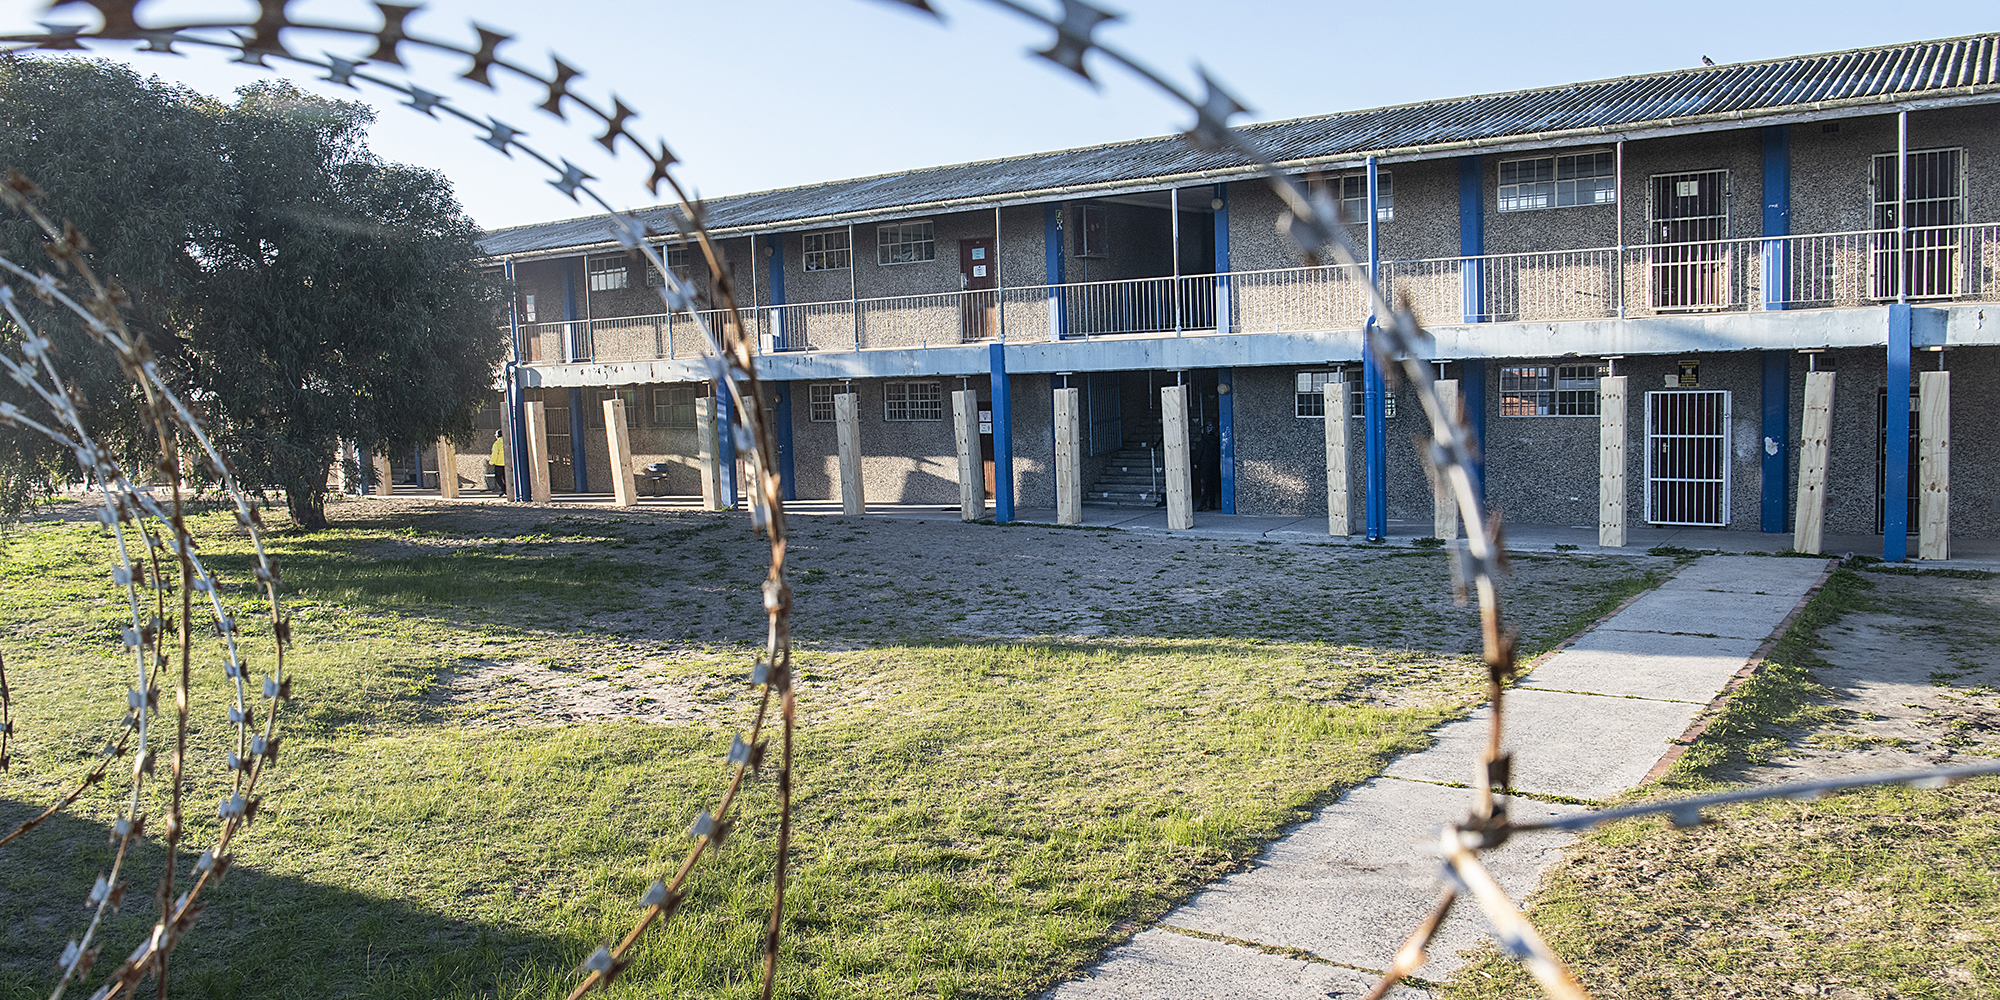 Are safer schools, health facilities possible in unsafe South Africa?